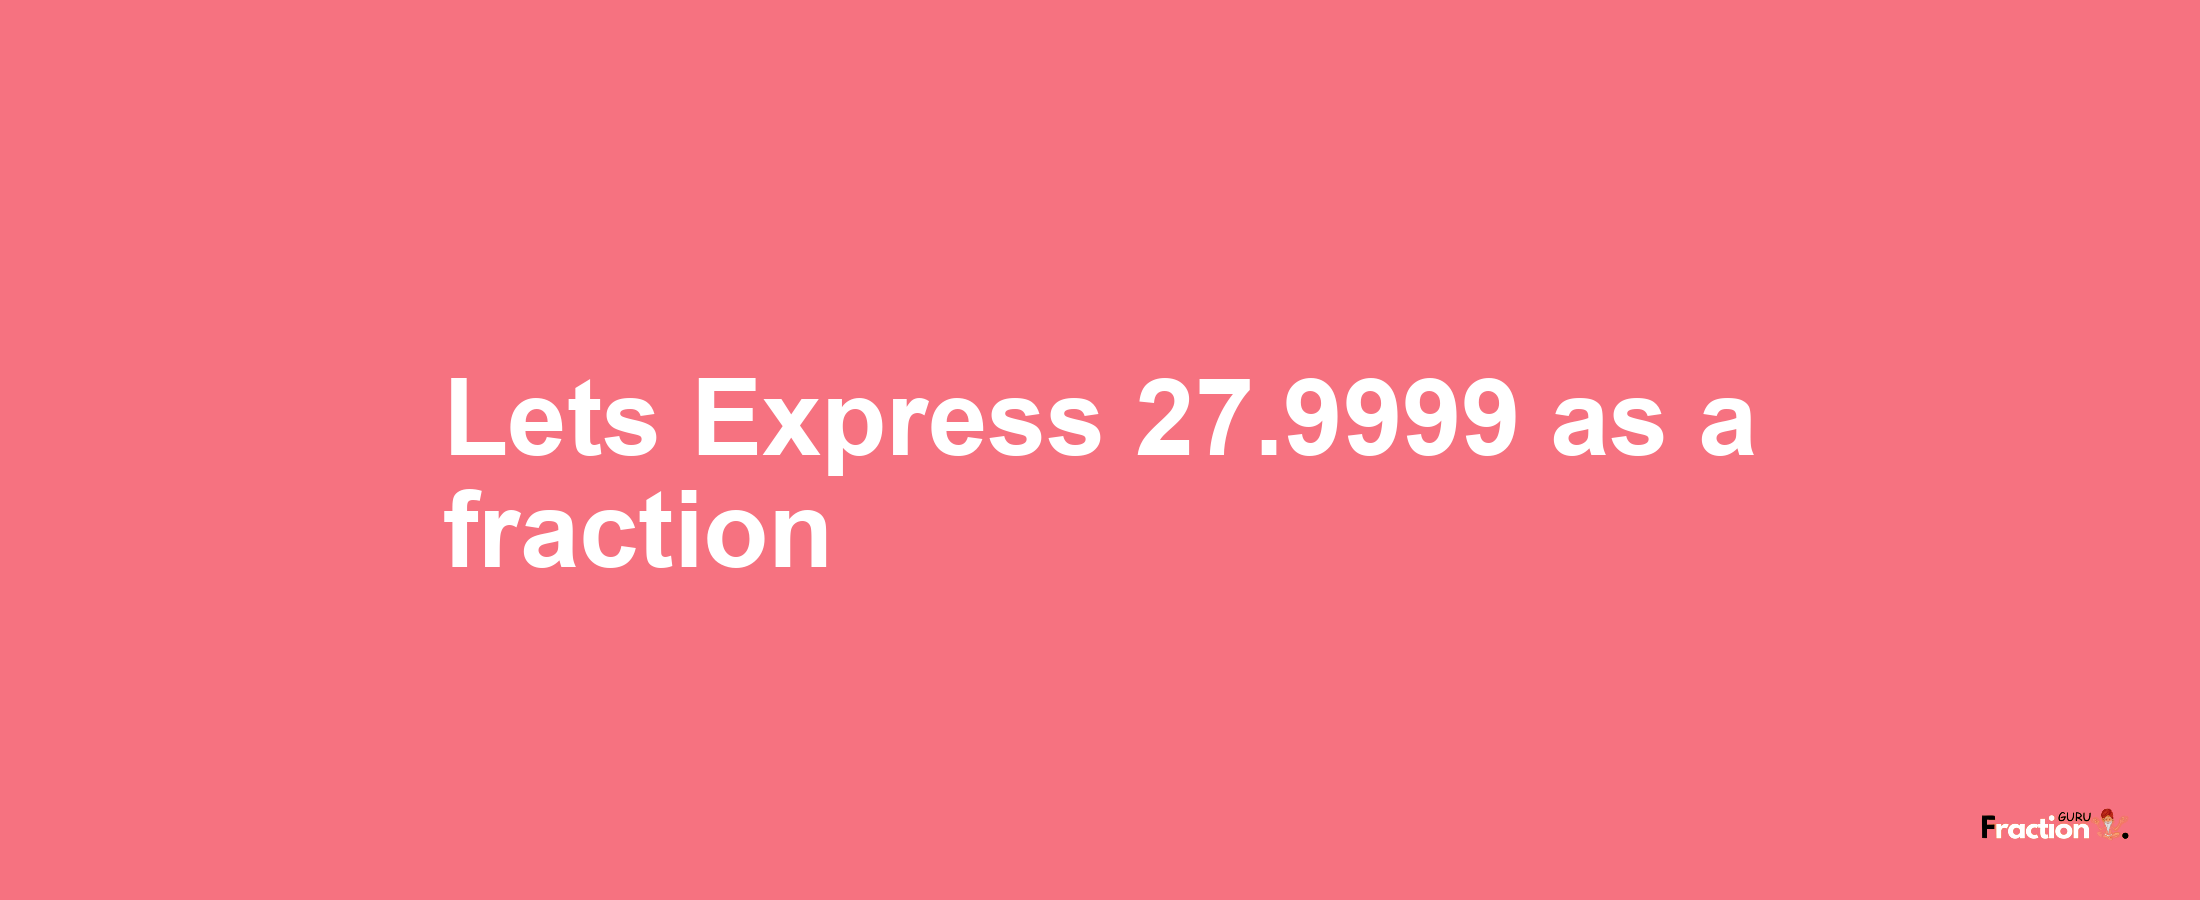 Lets Express 27.9999 as afraction